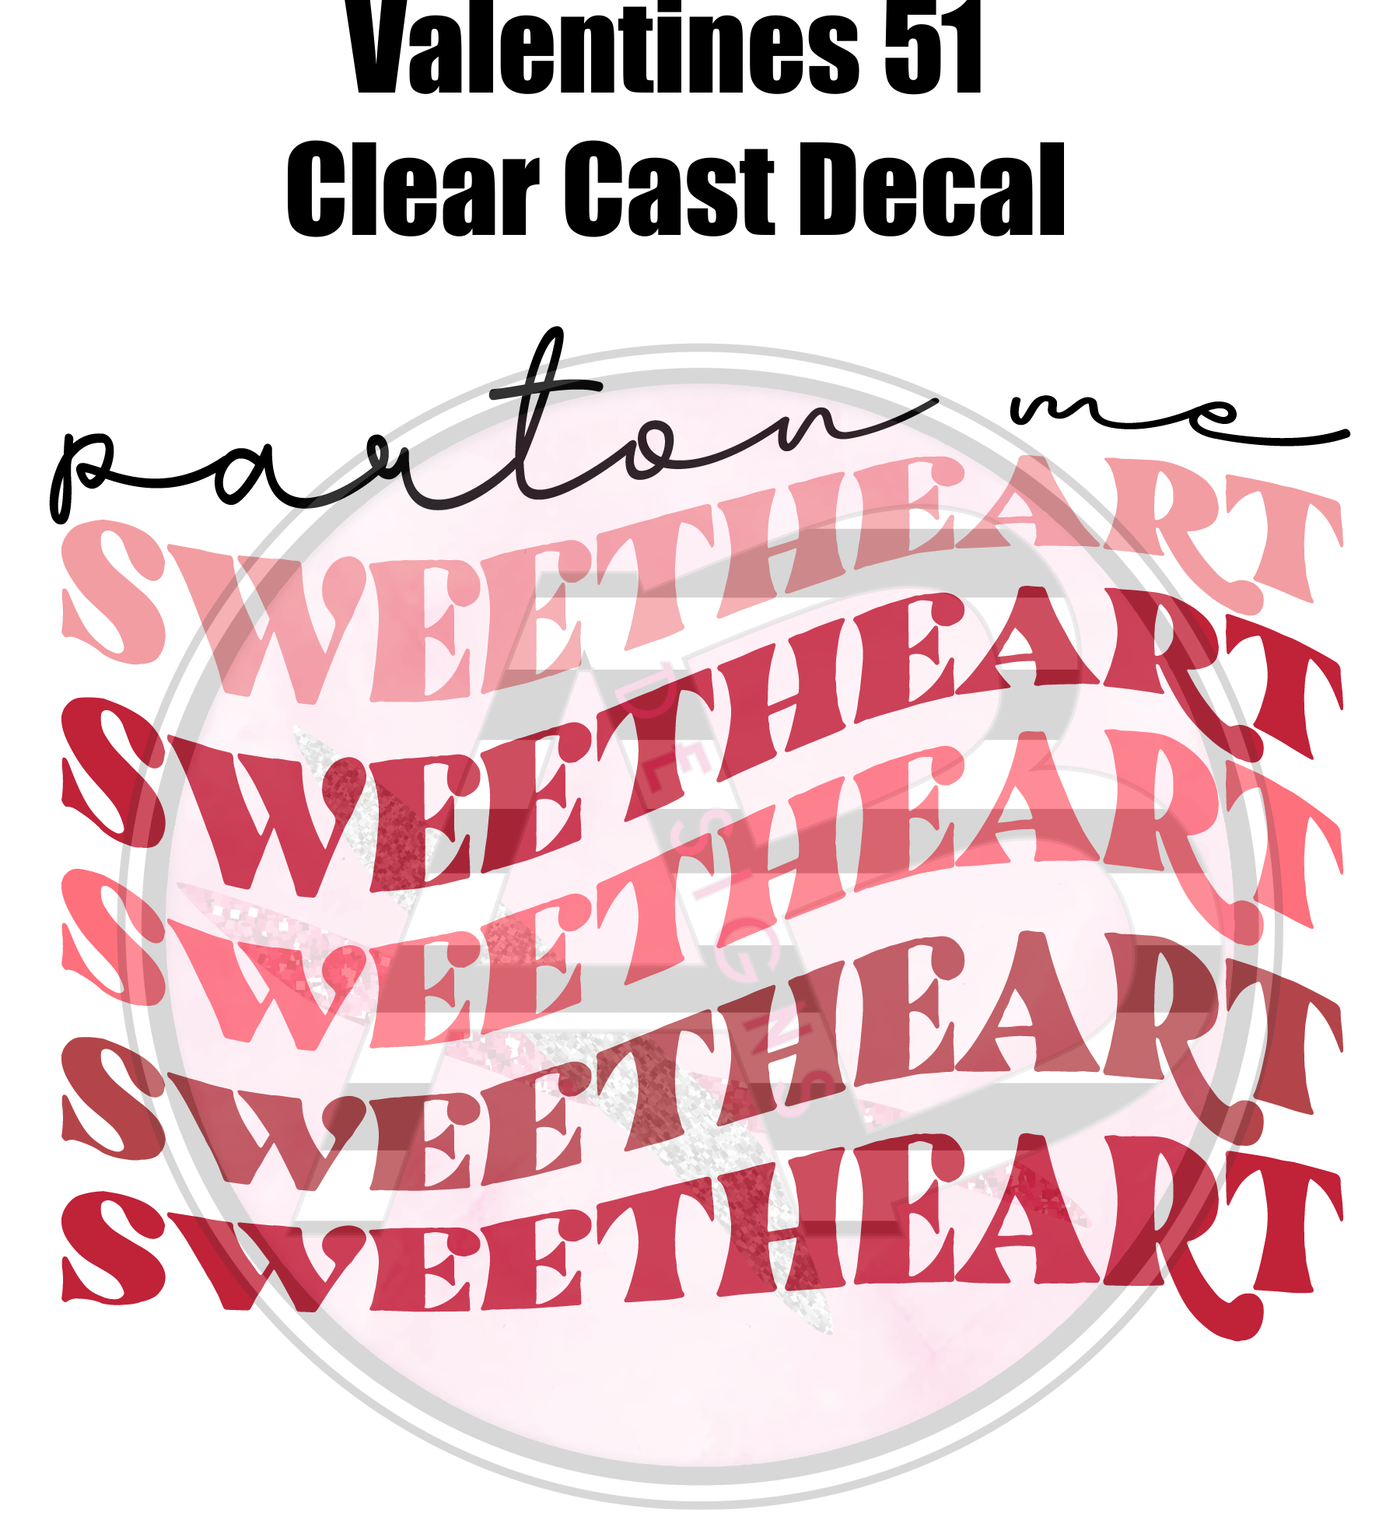 Valentines 51 - Clear Cast Decal